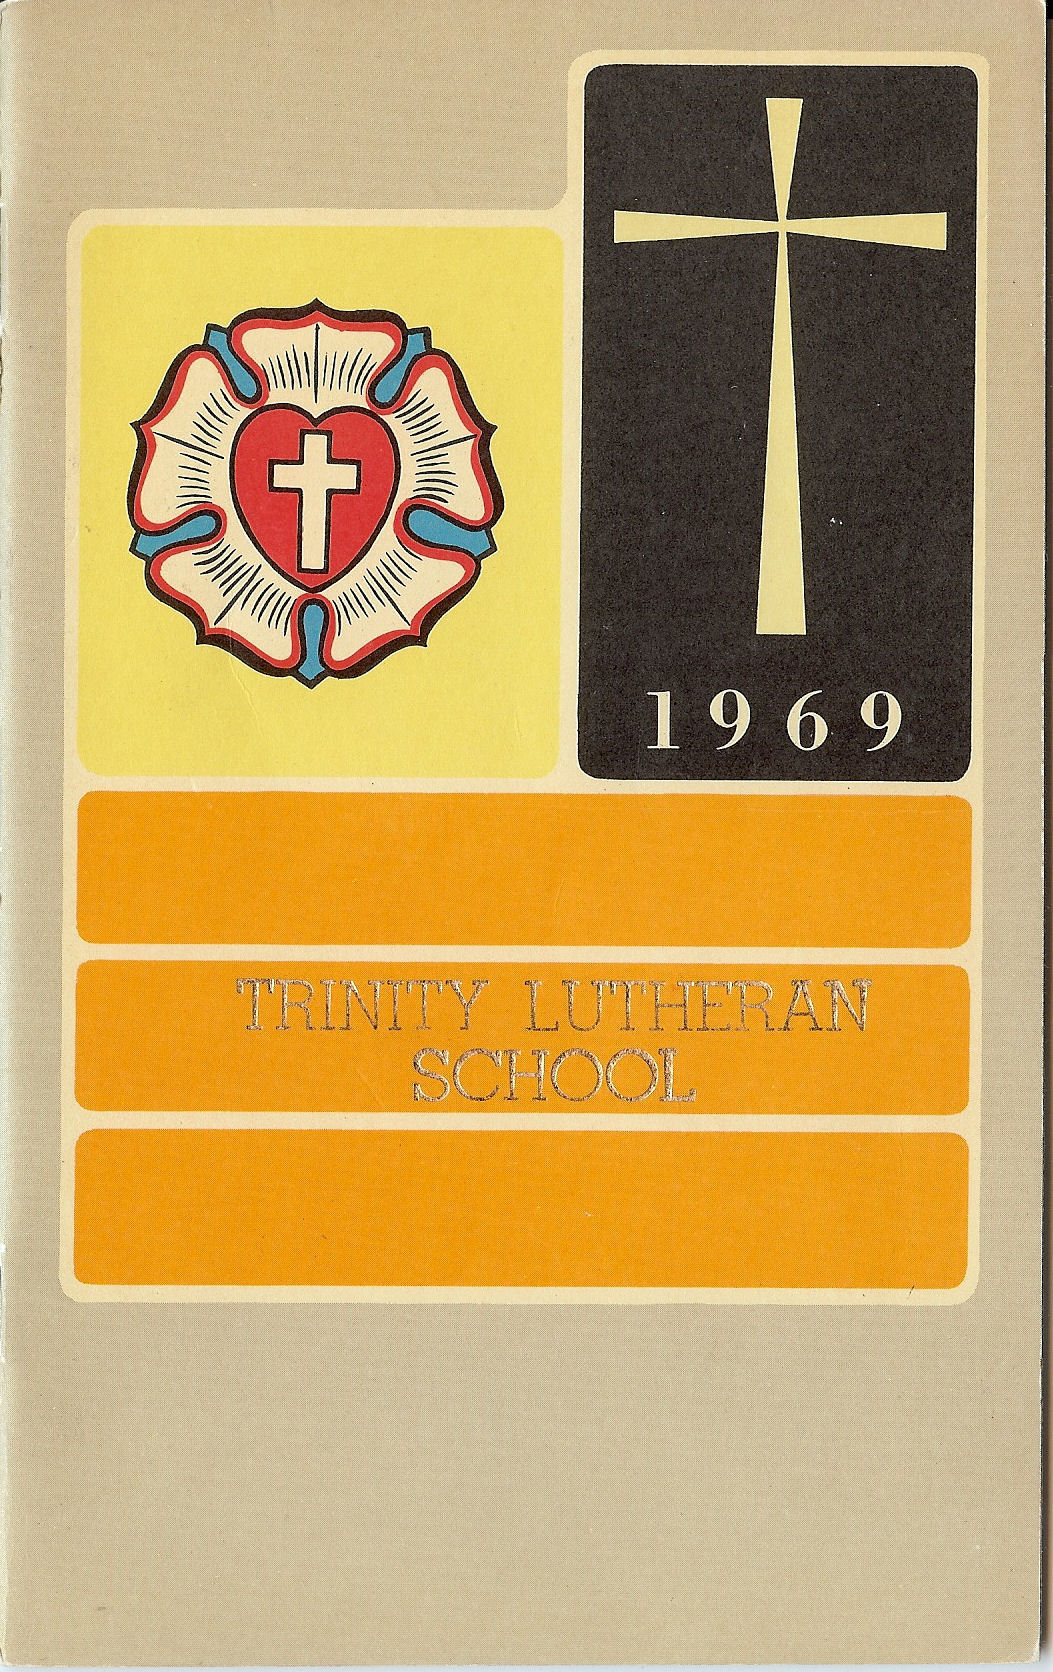 68-69 Yearbook Cover